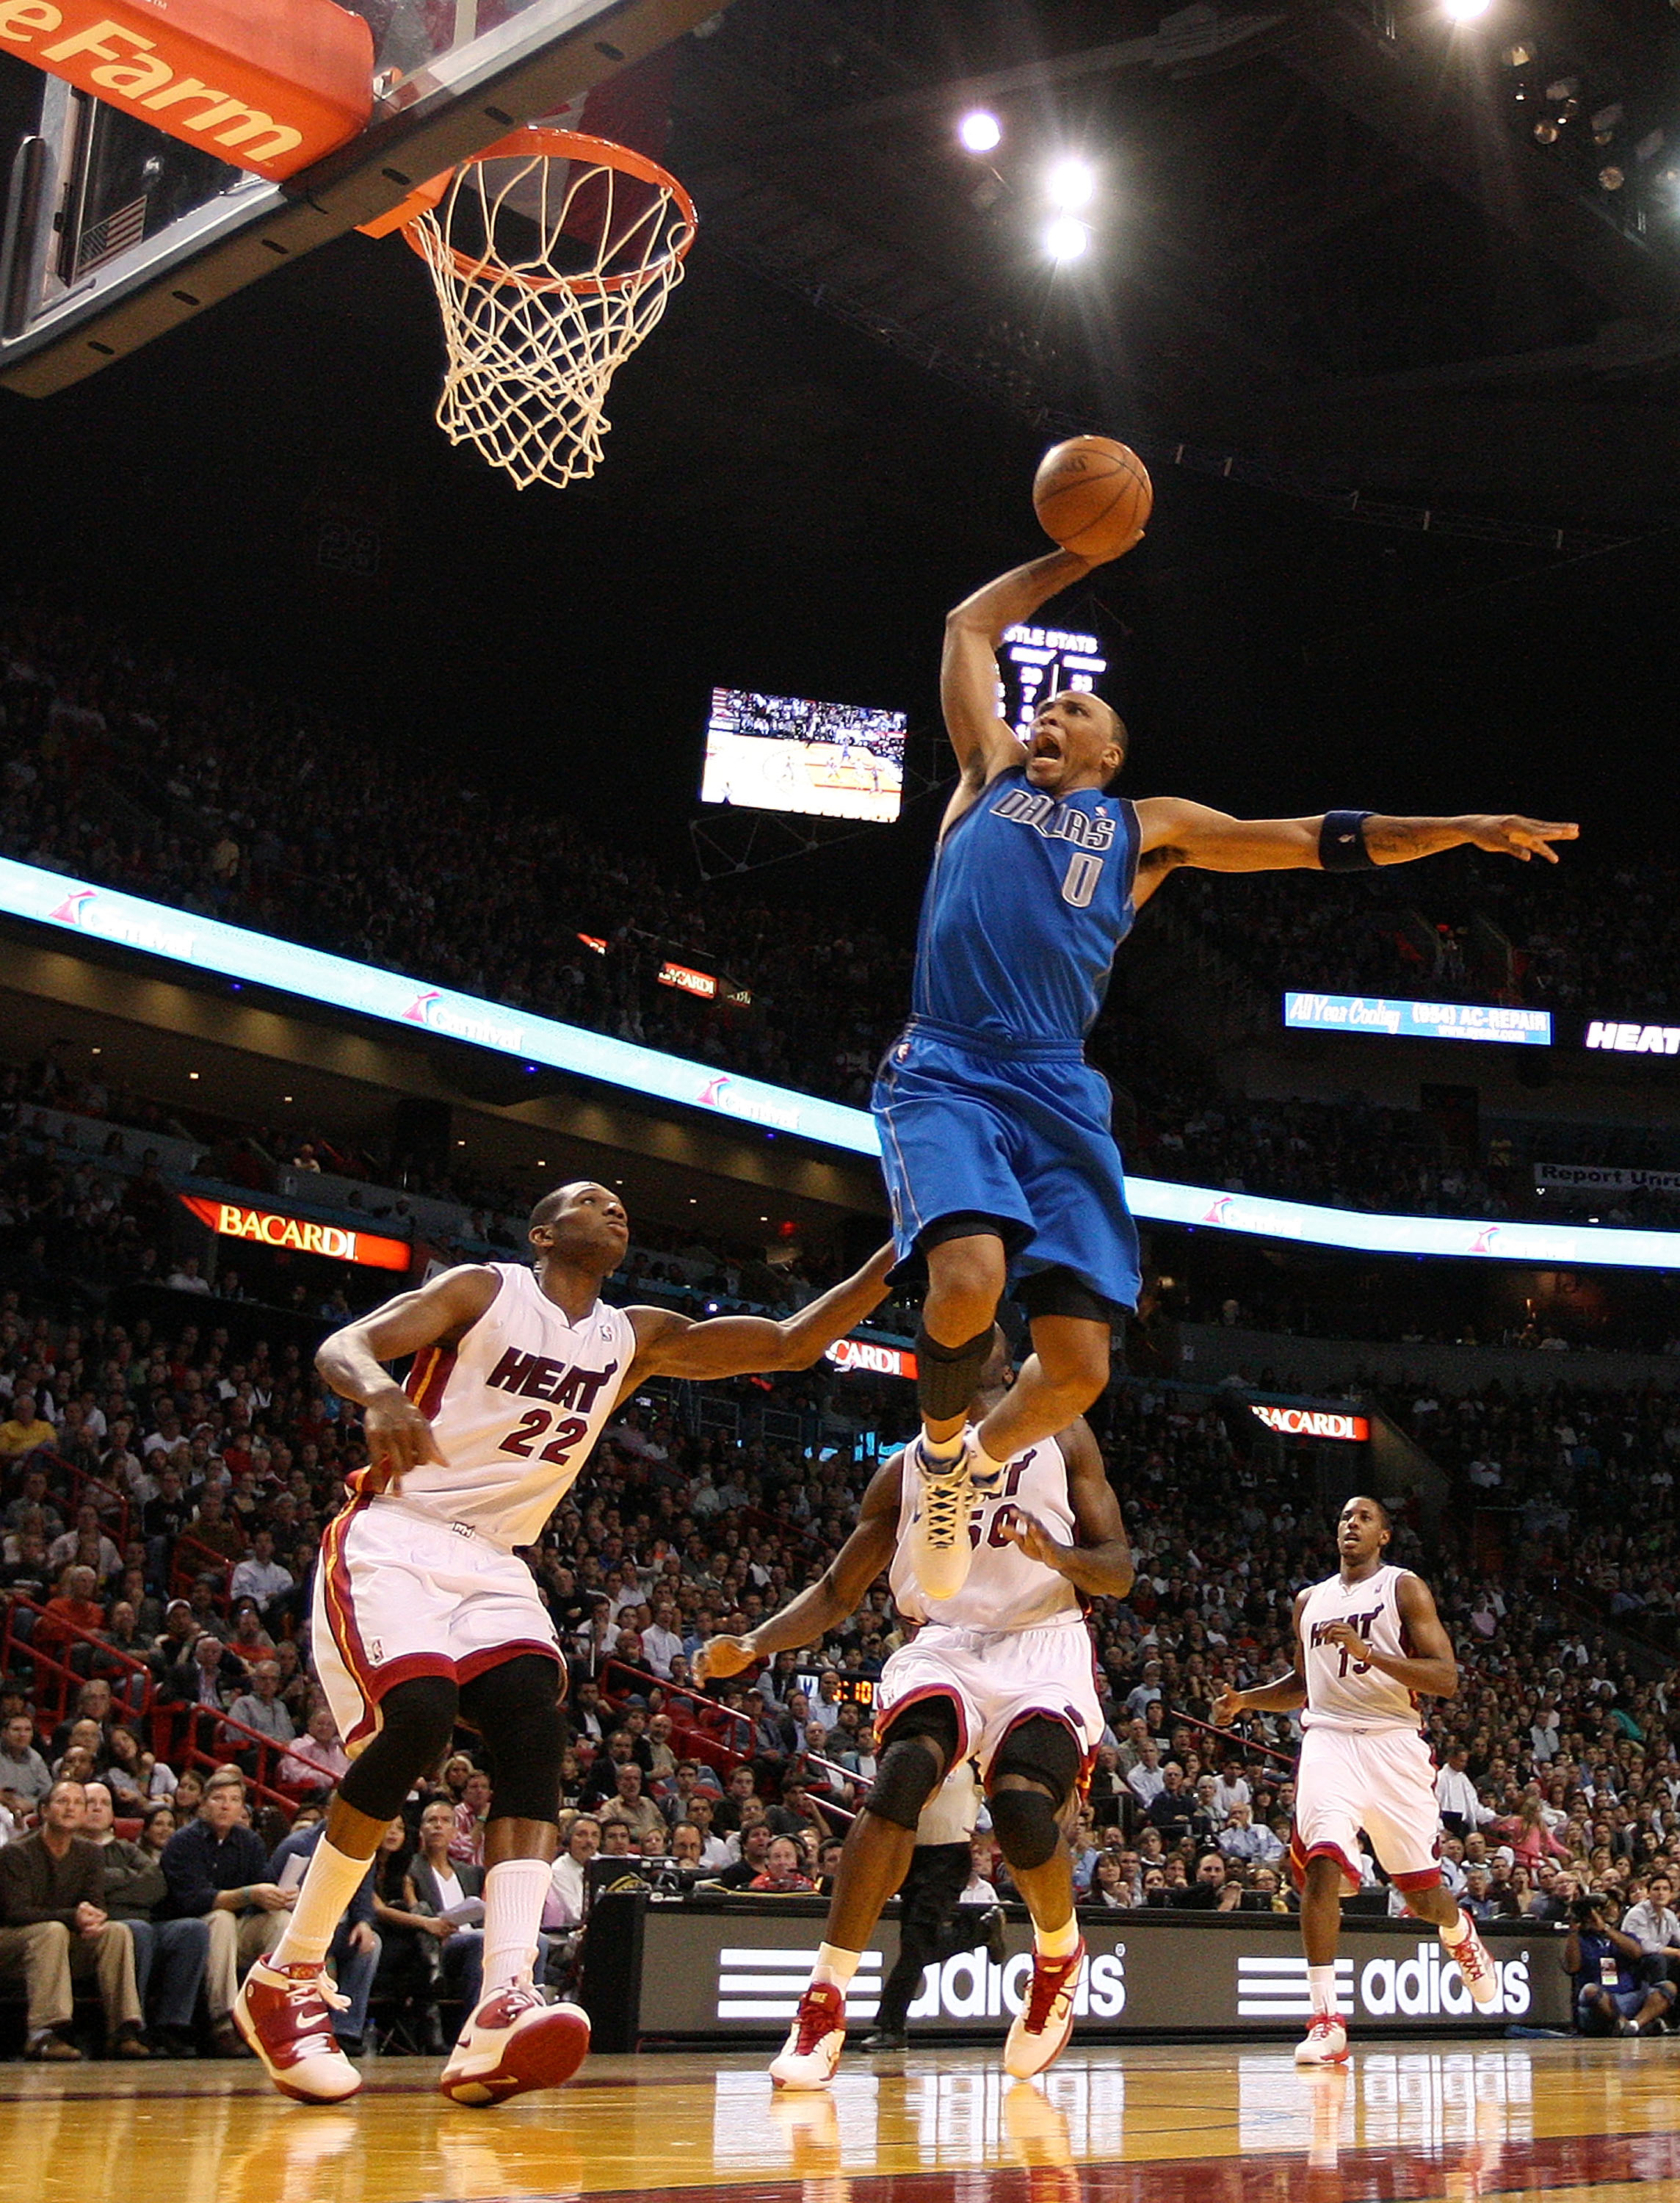 MIAMI, FL - DECEMBER 20:  Shawn Marion #0 of the Dallas Mavericks dunks over James Jones #22 of the Miami Heat during a game at American Airlines Arena on December 20, 2010 in Miami, Florida. NOTE TO USER: User expressly acknowledges and agrees that, by d